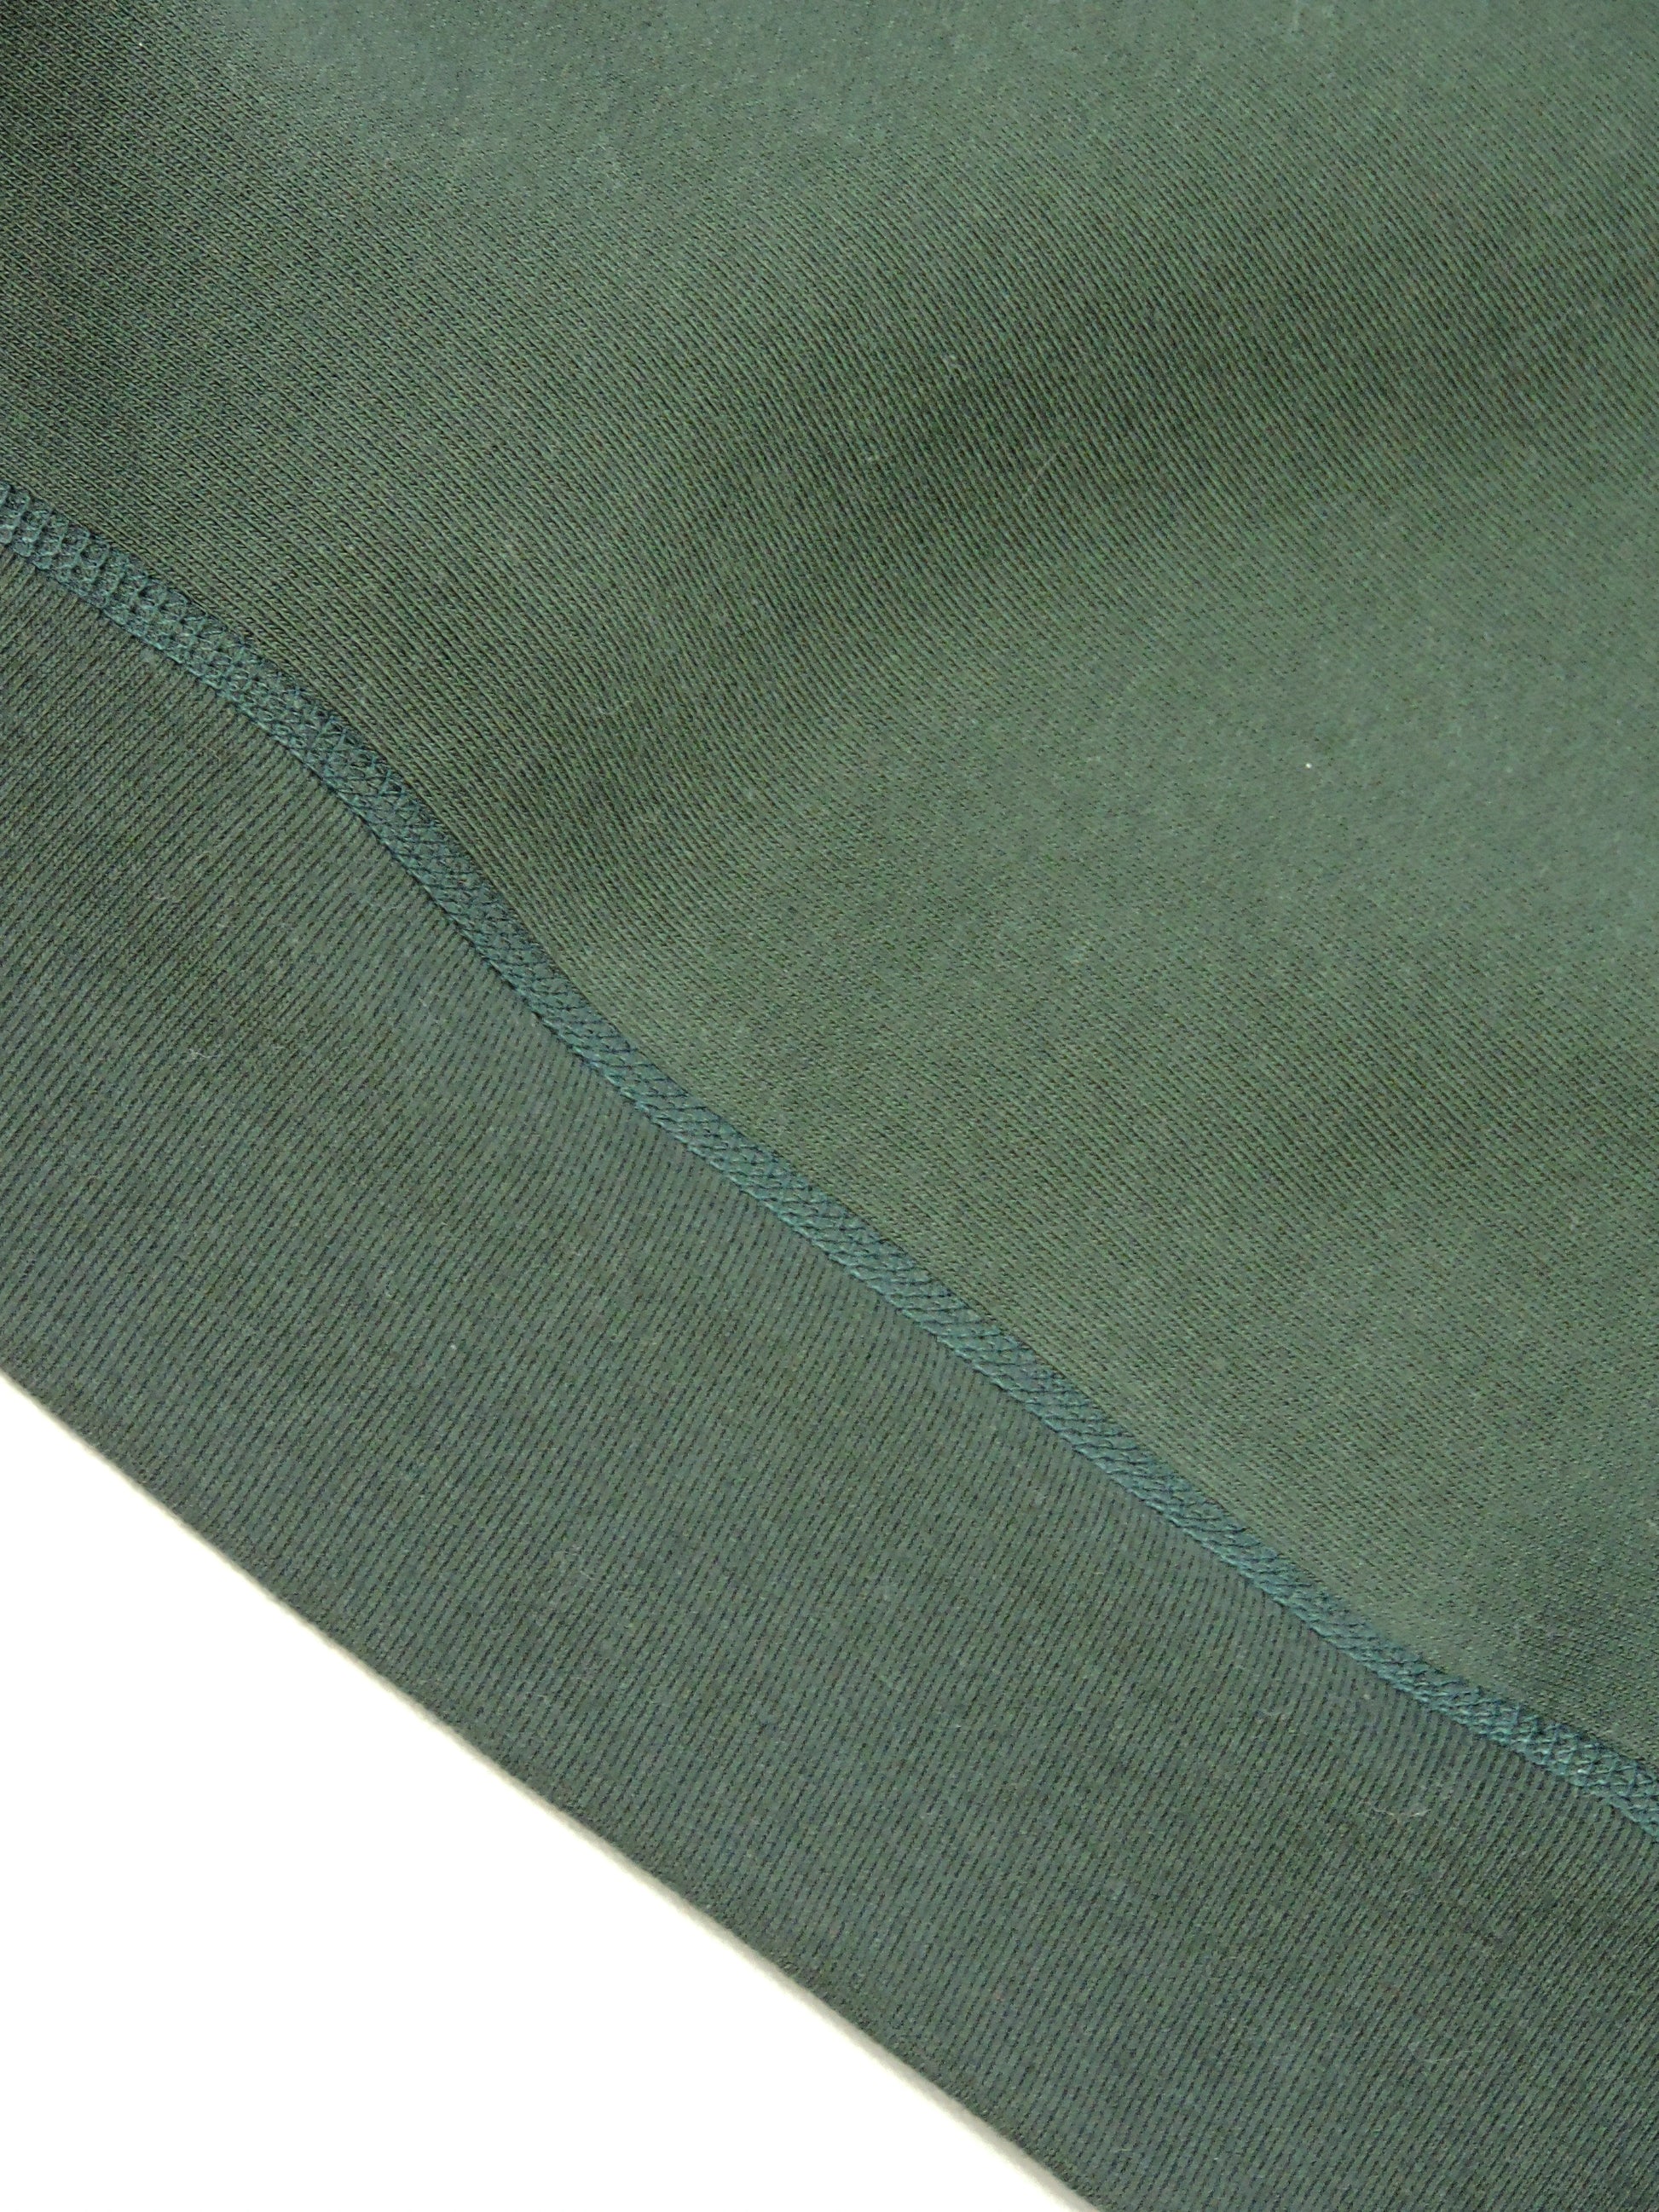 Close up of knitted seam above waist.